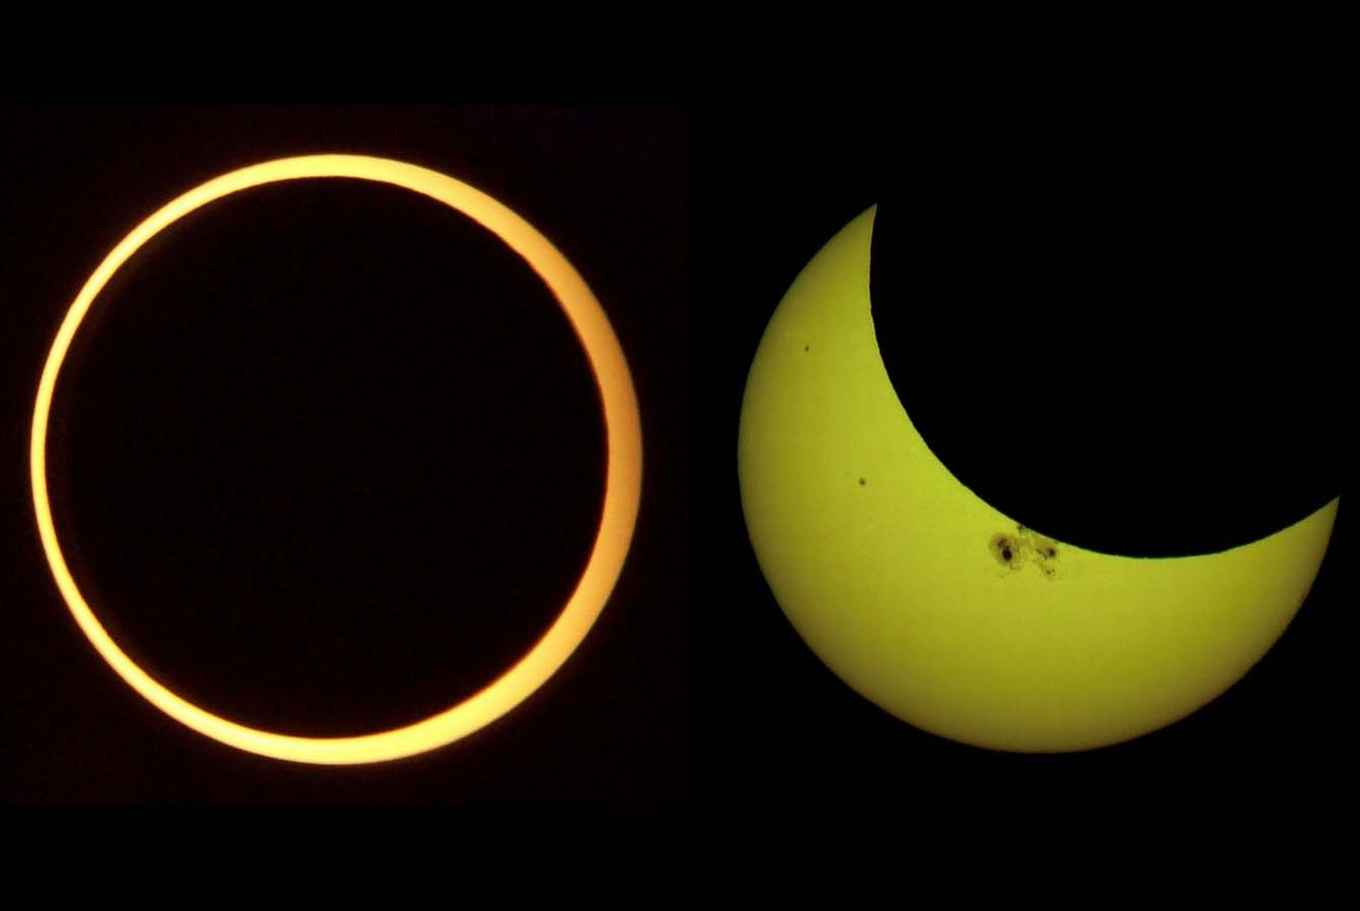 Figure 1: Annular solar eclipse (left), and partial eclipse (right).